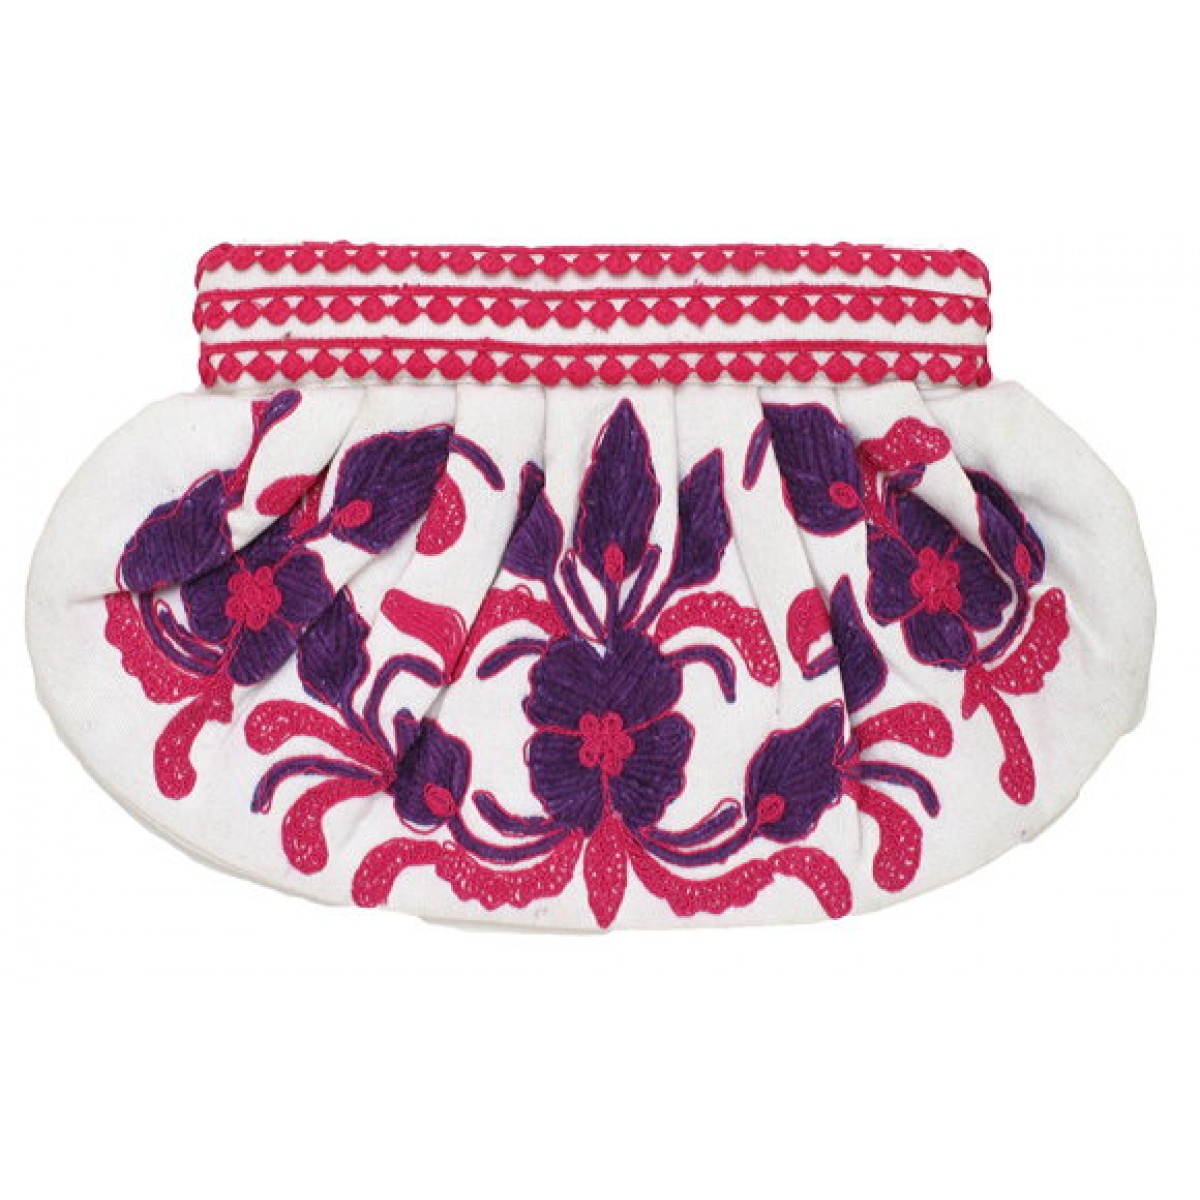 Clutch Floral Embroidery